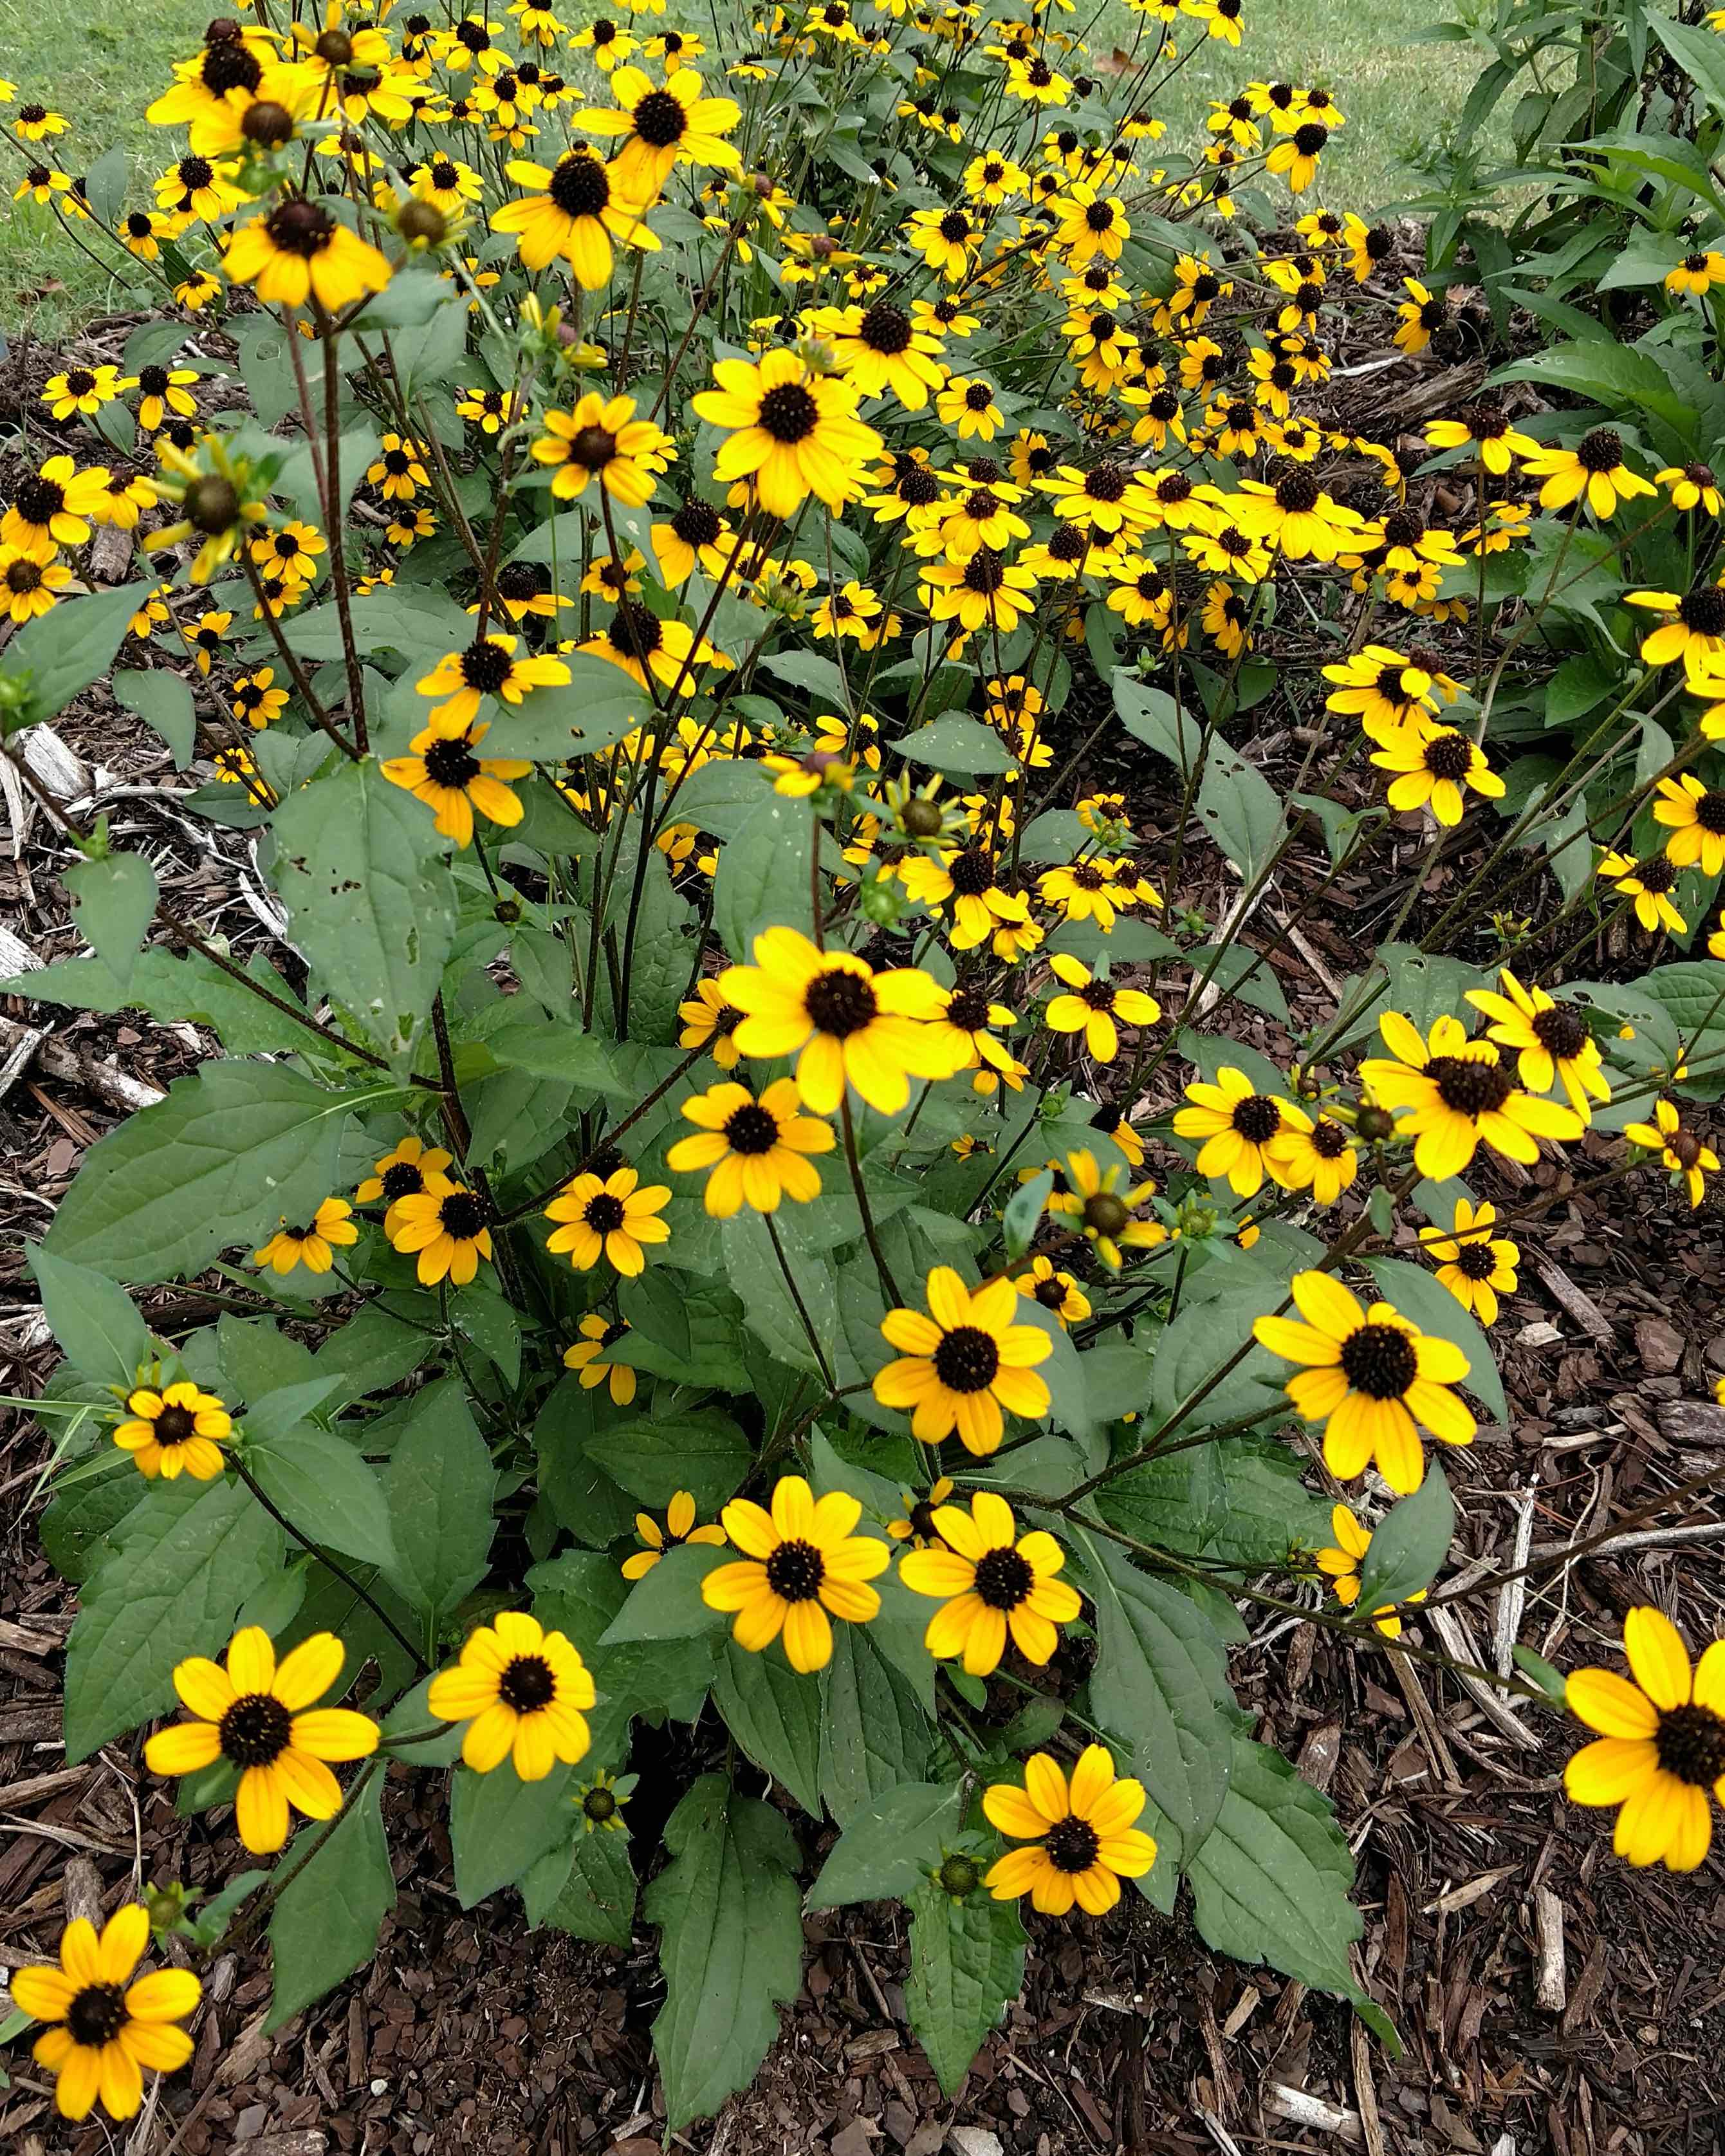 The Scientific Name is Rudbeckia triloba. You will likely hear them called Browneyed Susan. This picture shows the Easily identified by the many dozens of flowers on this 'bushy' plant. of Rudbeckia triloba